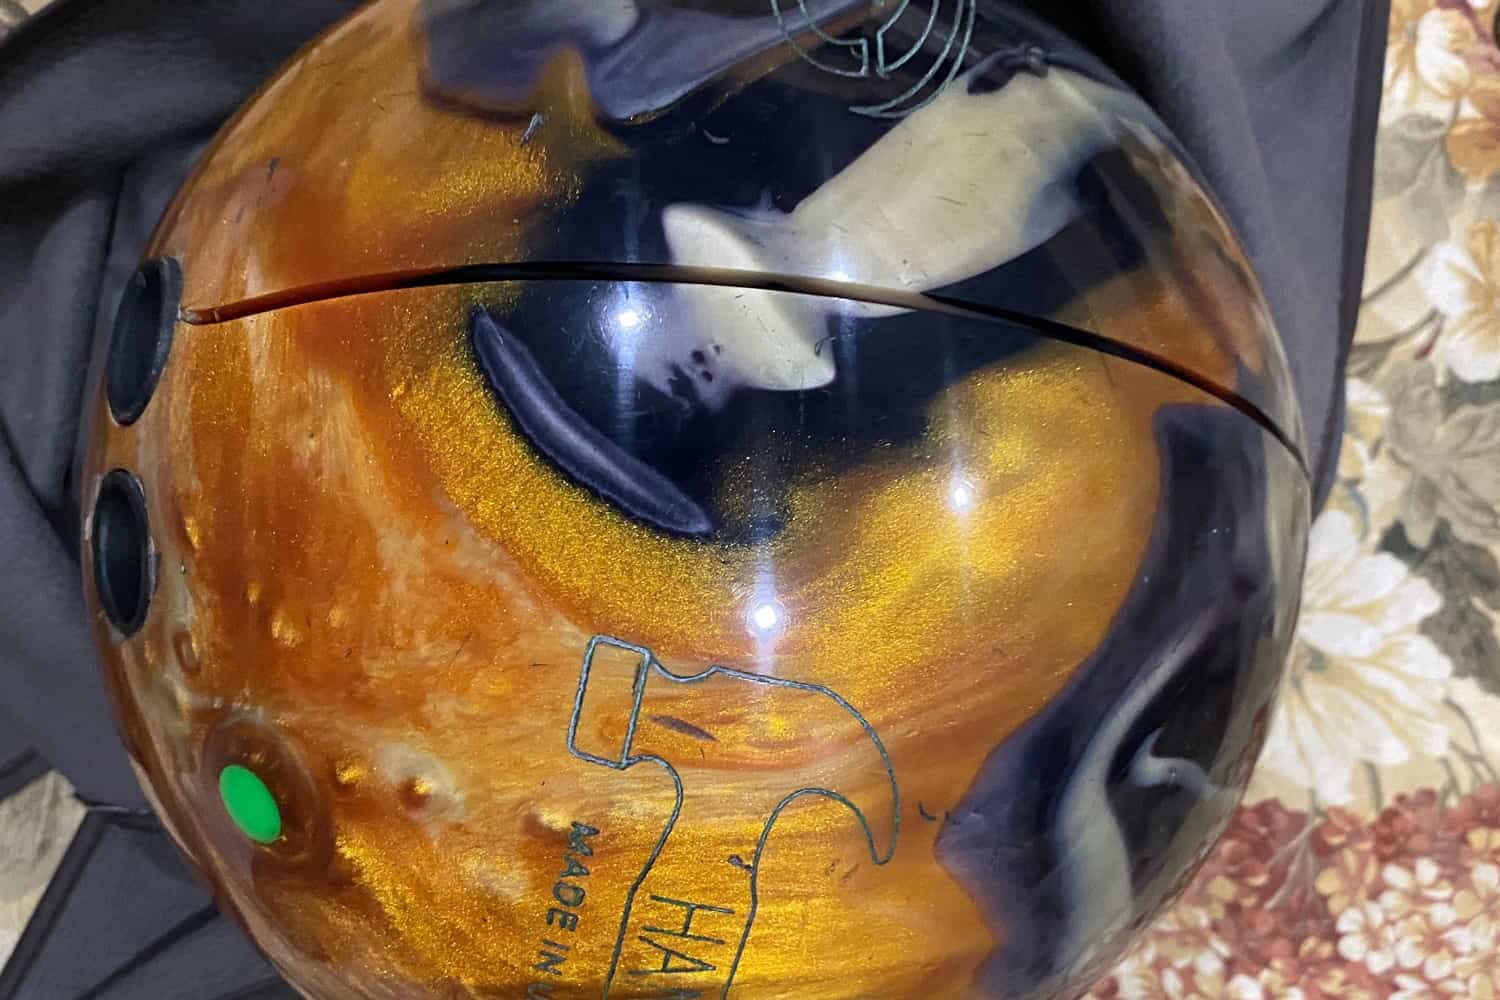 Bowling ball. Crack due to long period kept in store.